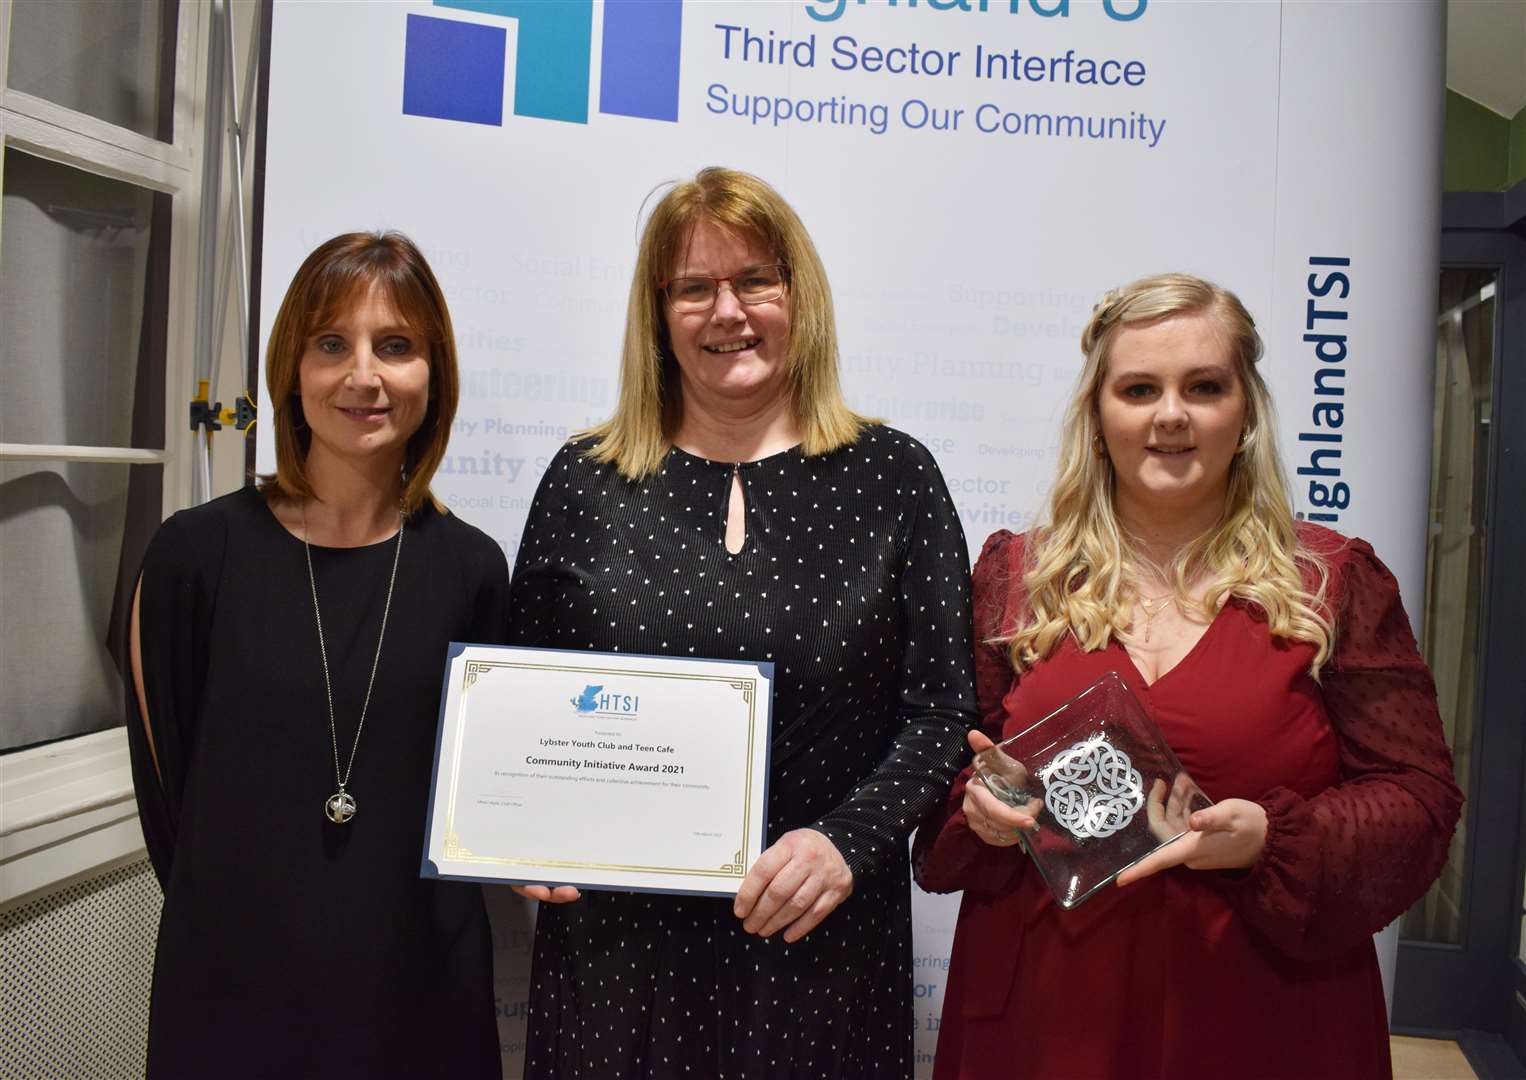 Caithness Community Connections won the Community Initiative Award for its work with Lybster Youth Clubs and Teen Café. From left: Amanda Houliston, Heather Urquhart and Sophie Campbell.